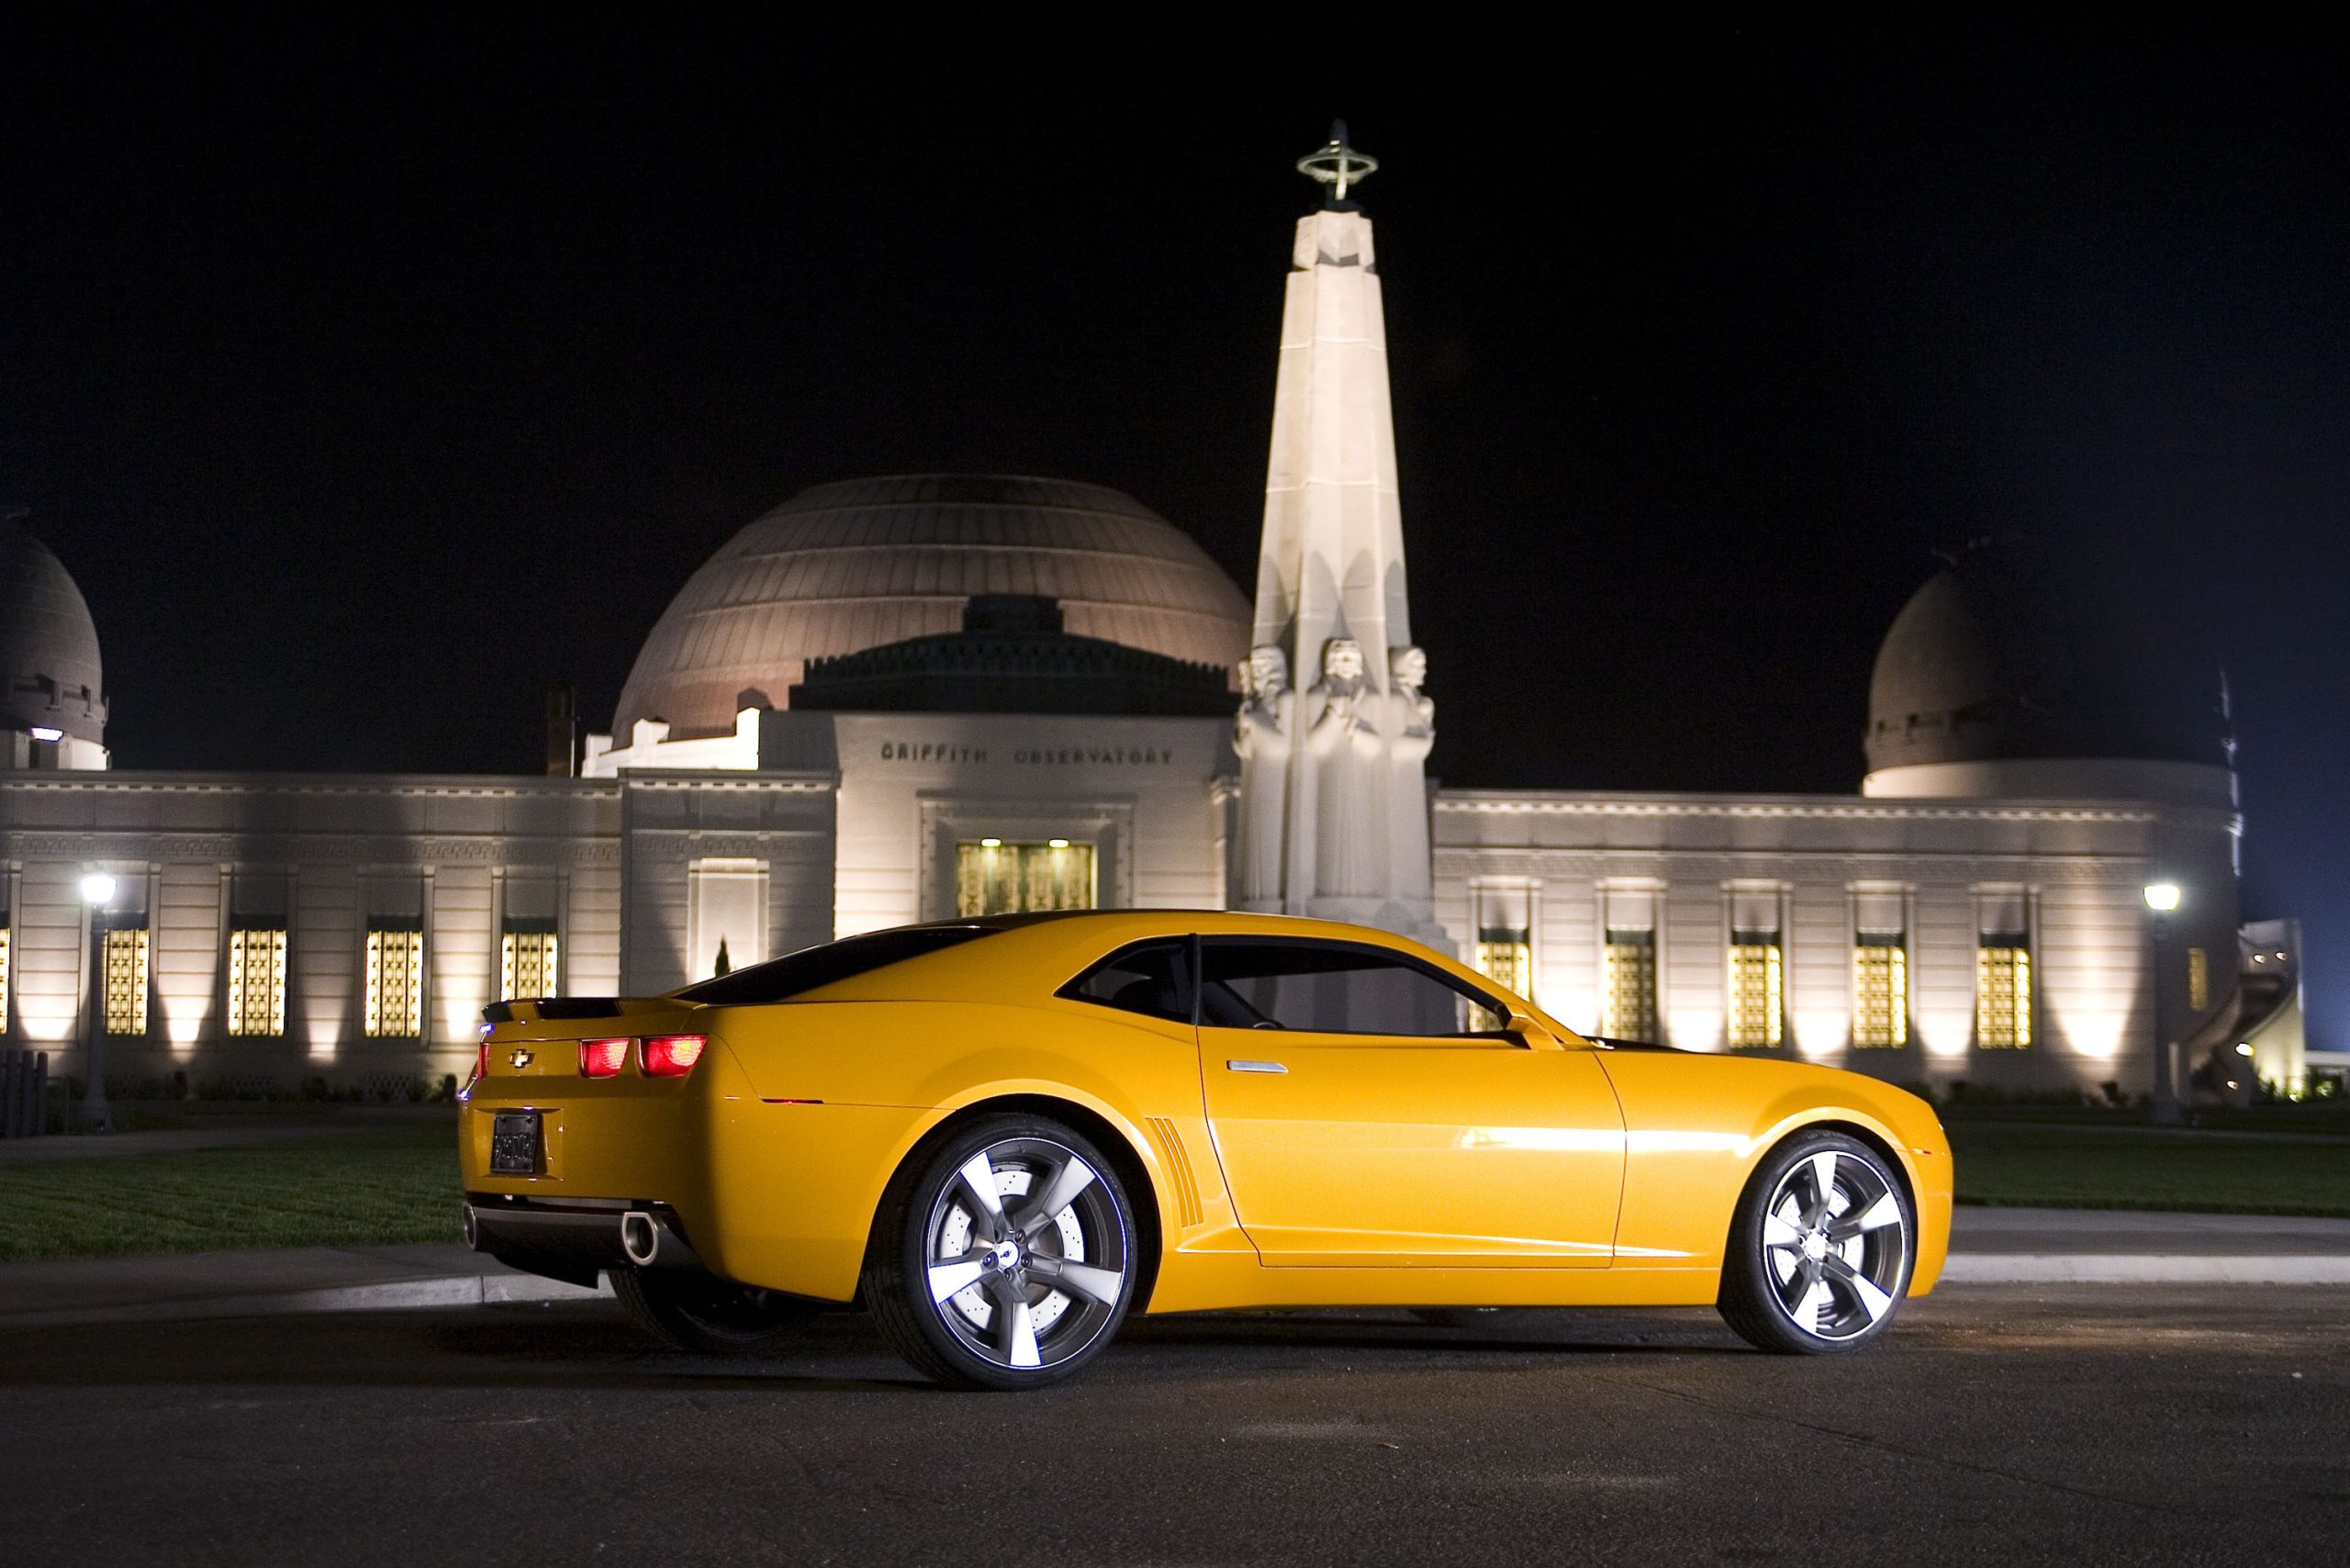 Since Michael Bay’s first Transformers film in 2007, the fifth-generation Camaro has been readily associated as the iconic movie character Bumblebee.